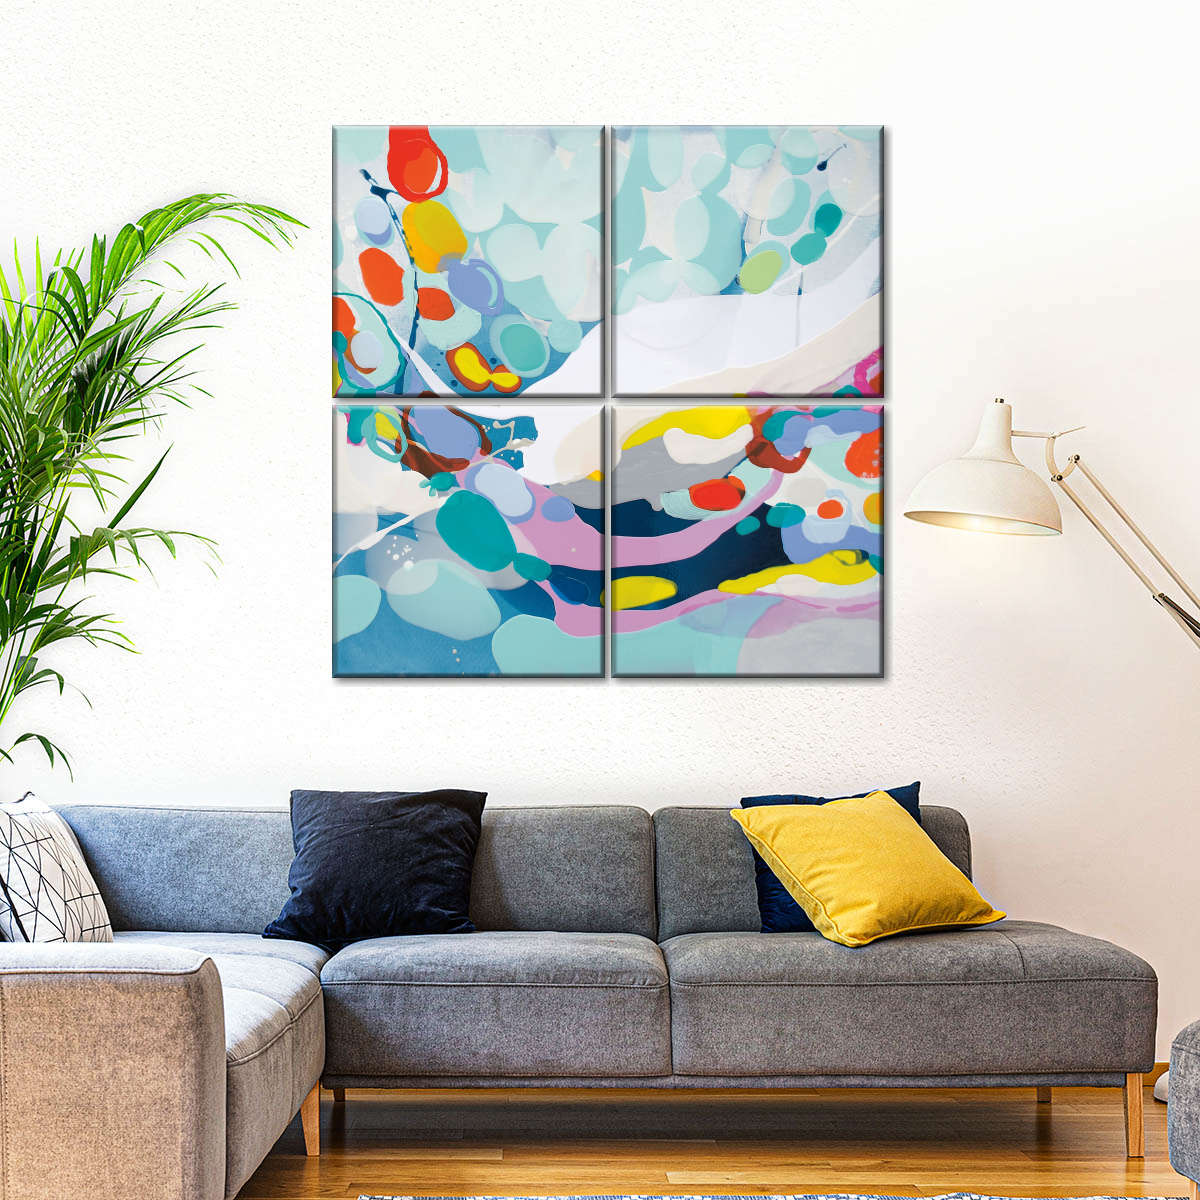 Kiss On The Lips Wall Art | Painting | by Claire Desjardins